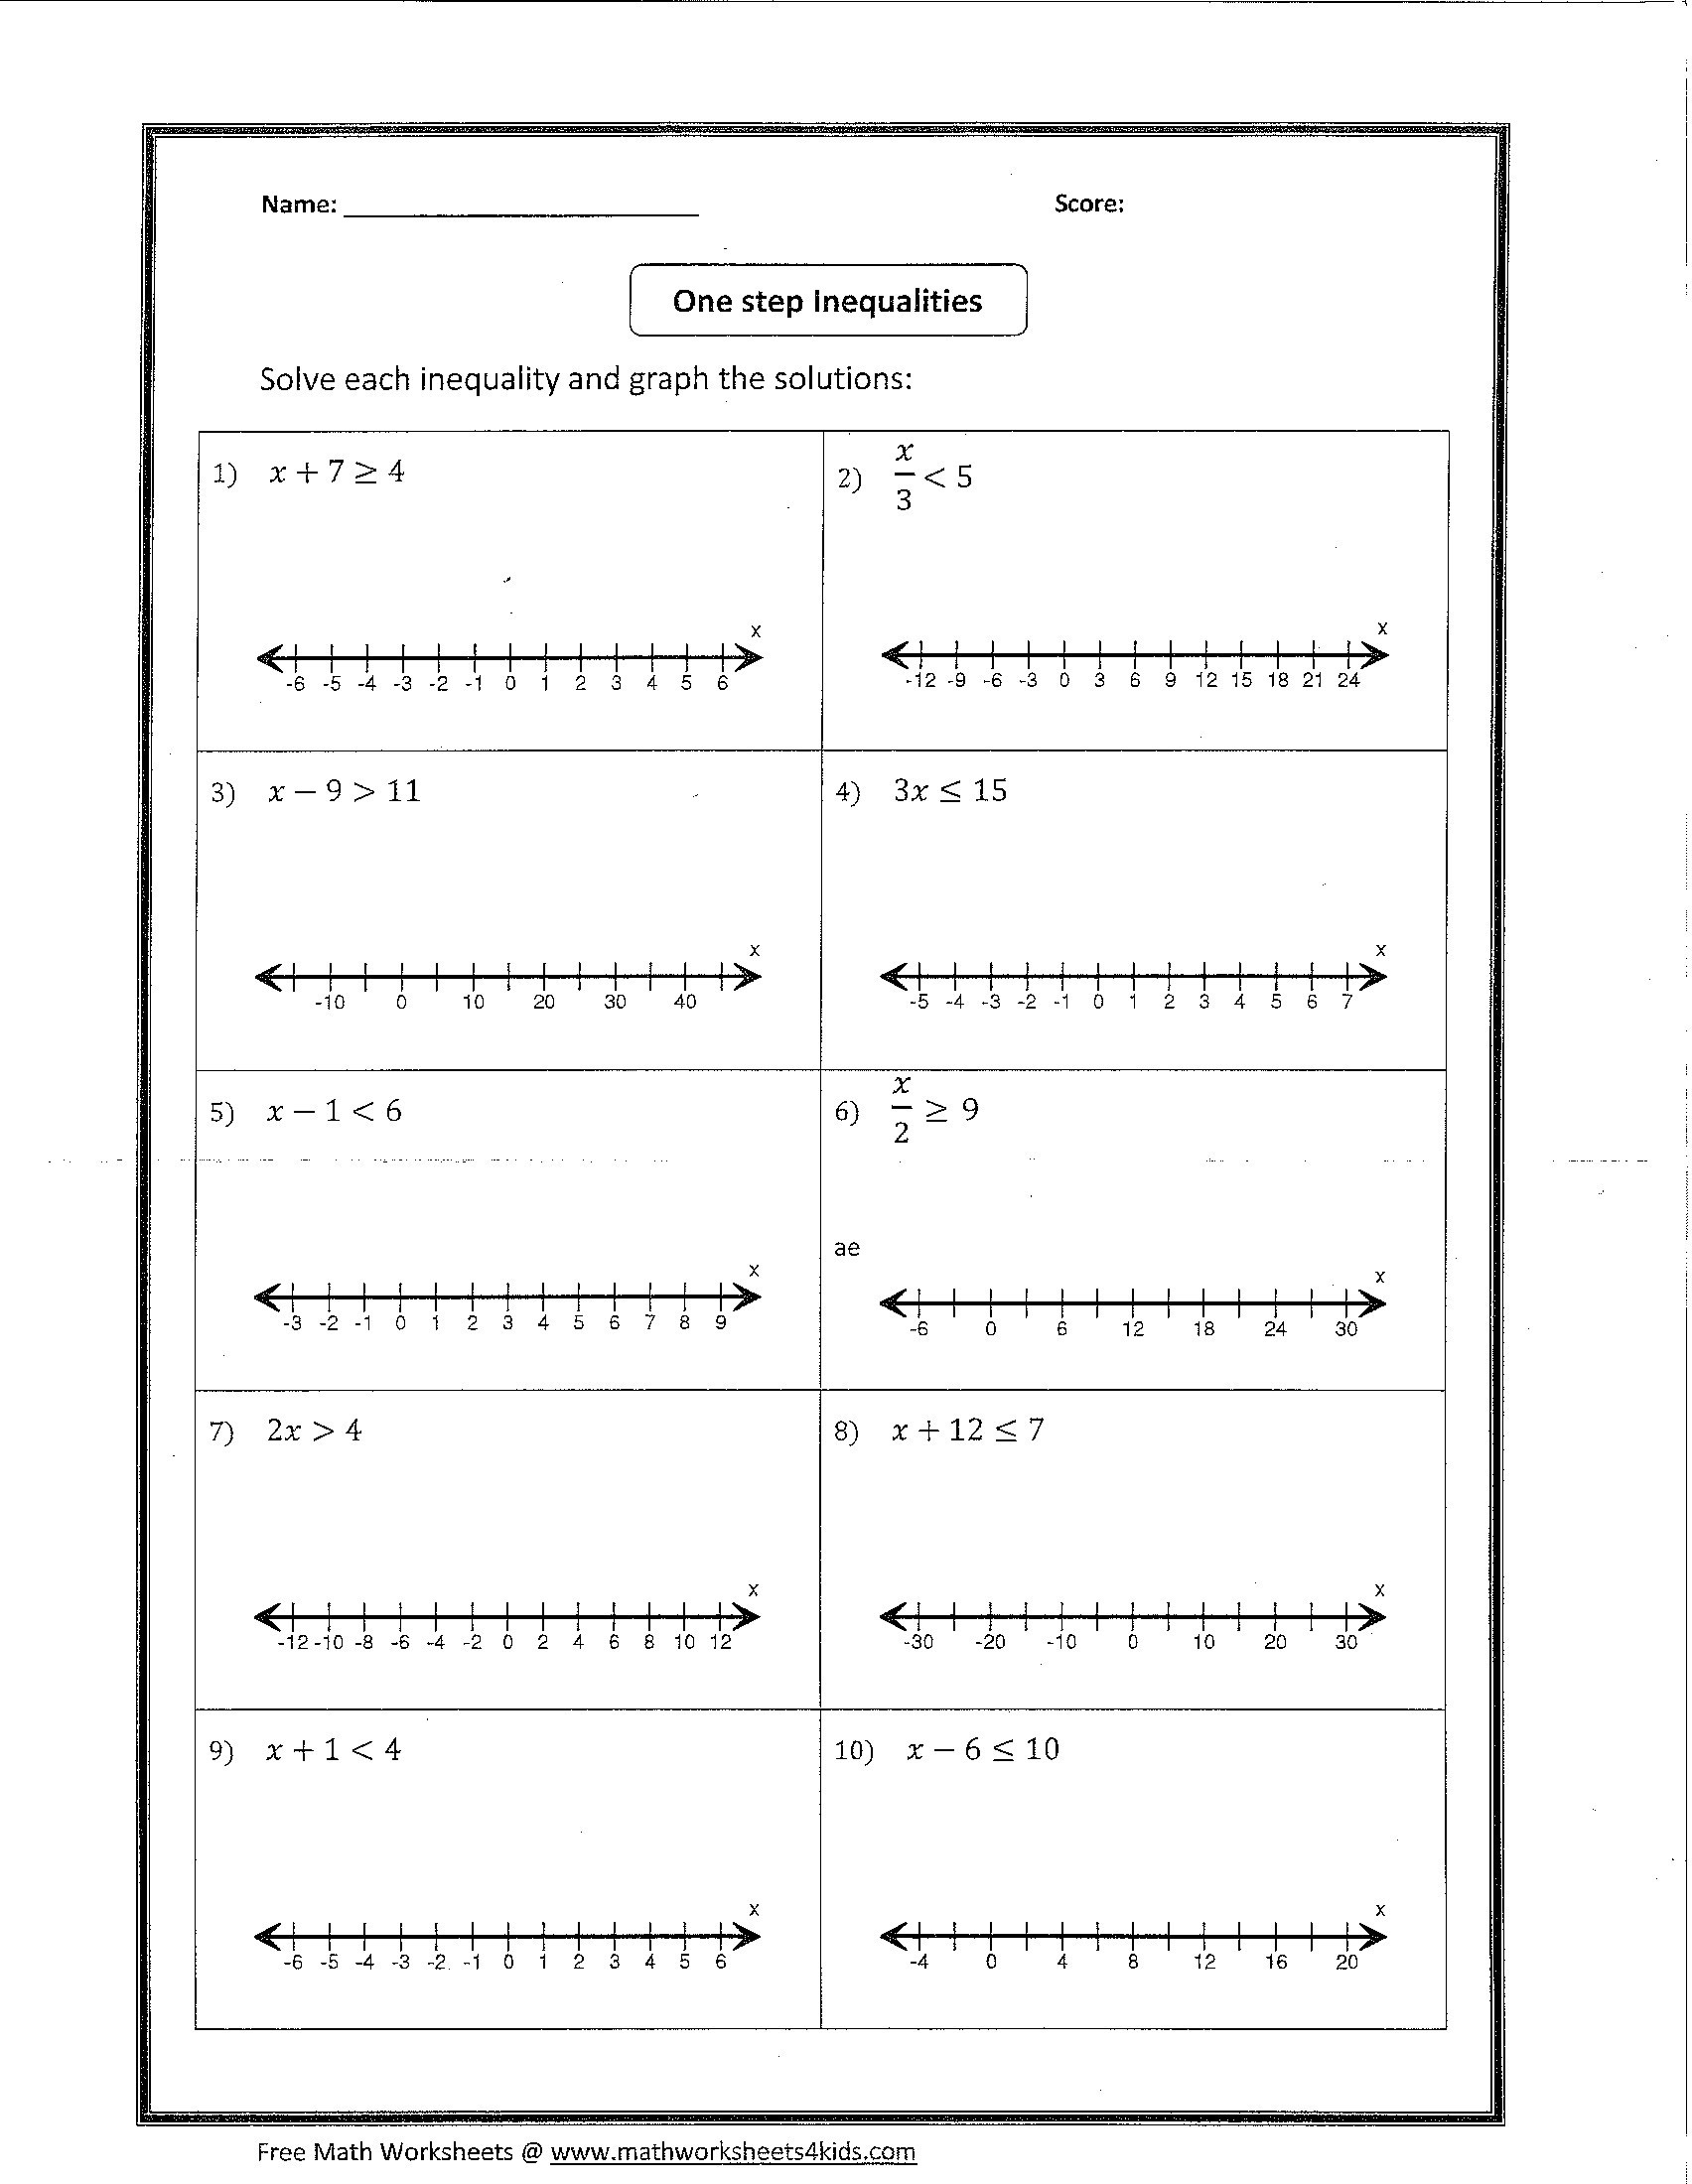 Linear Equations and Inequalities Worksheet Lovely Linear Equations Worksheet with Answers